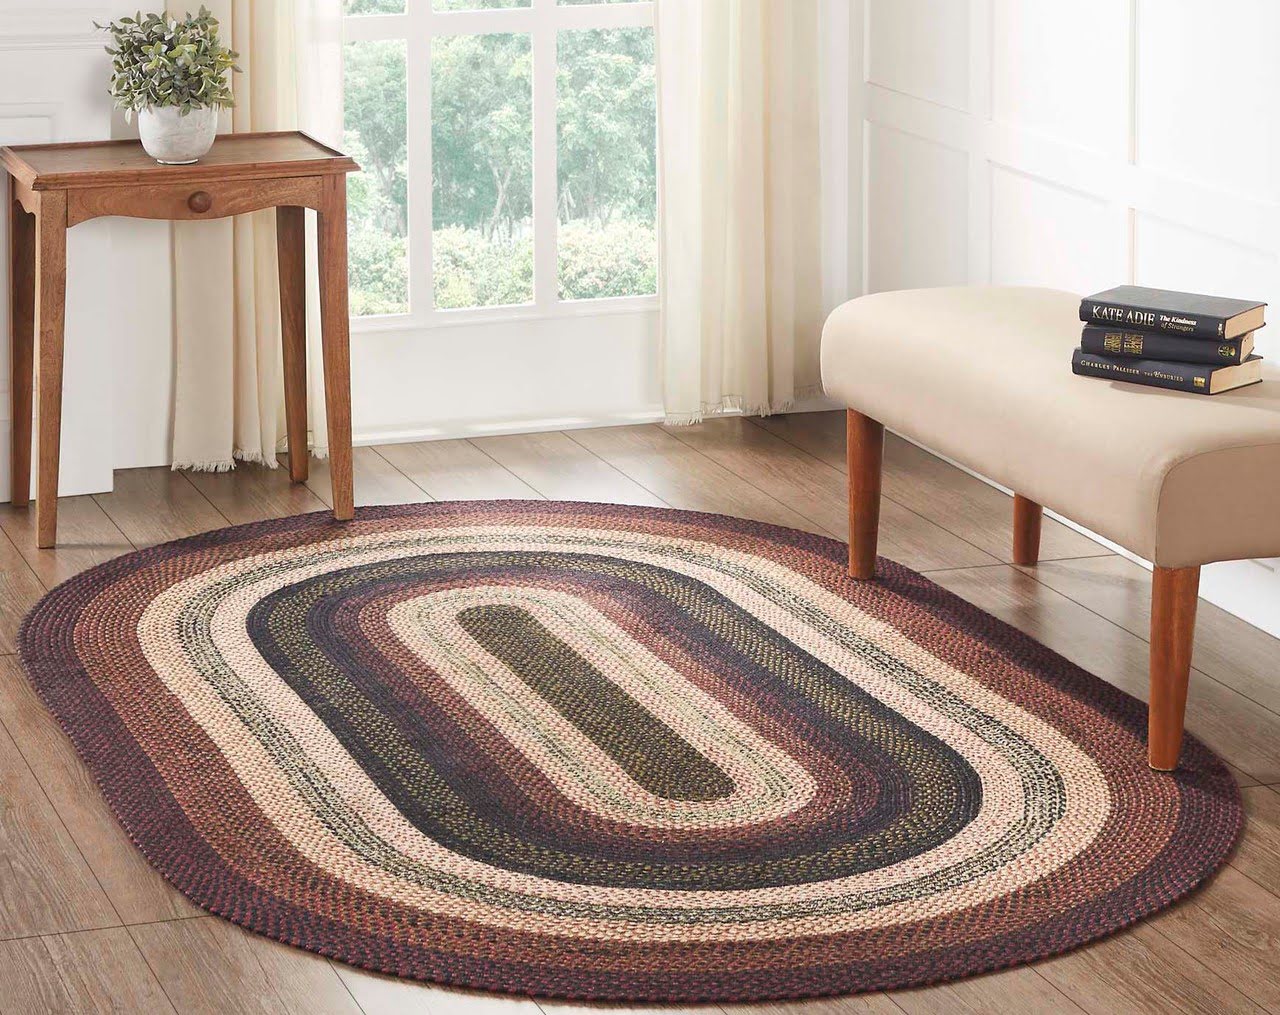 10 Unbelievable Braided Rugs For 2023 1697454976 